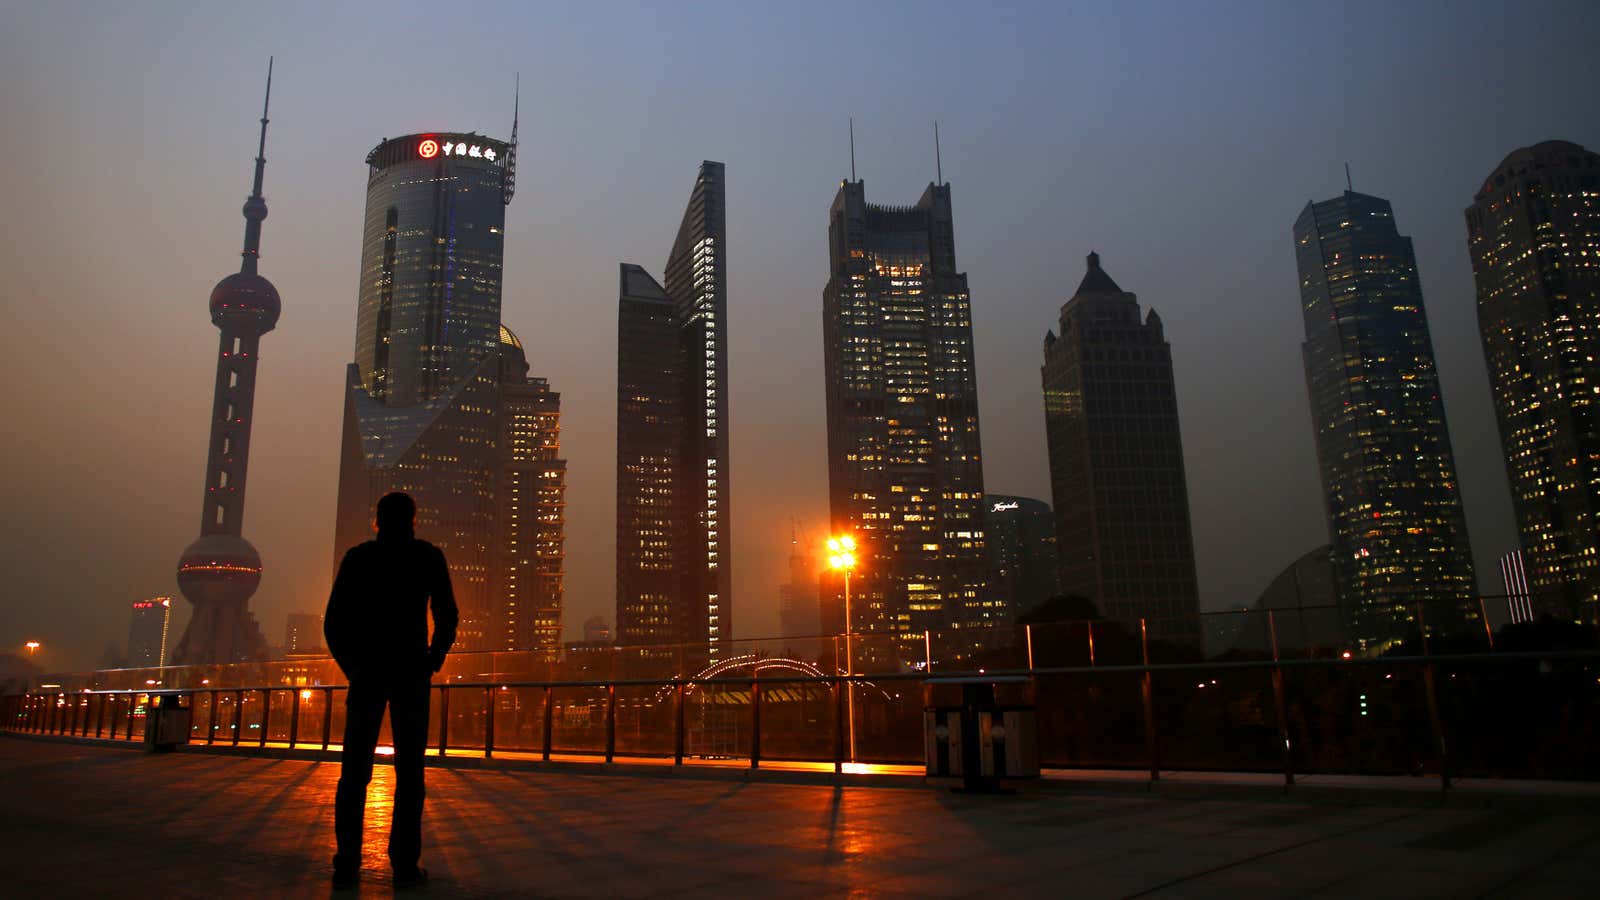 Whither the the Pudong financial district?